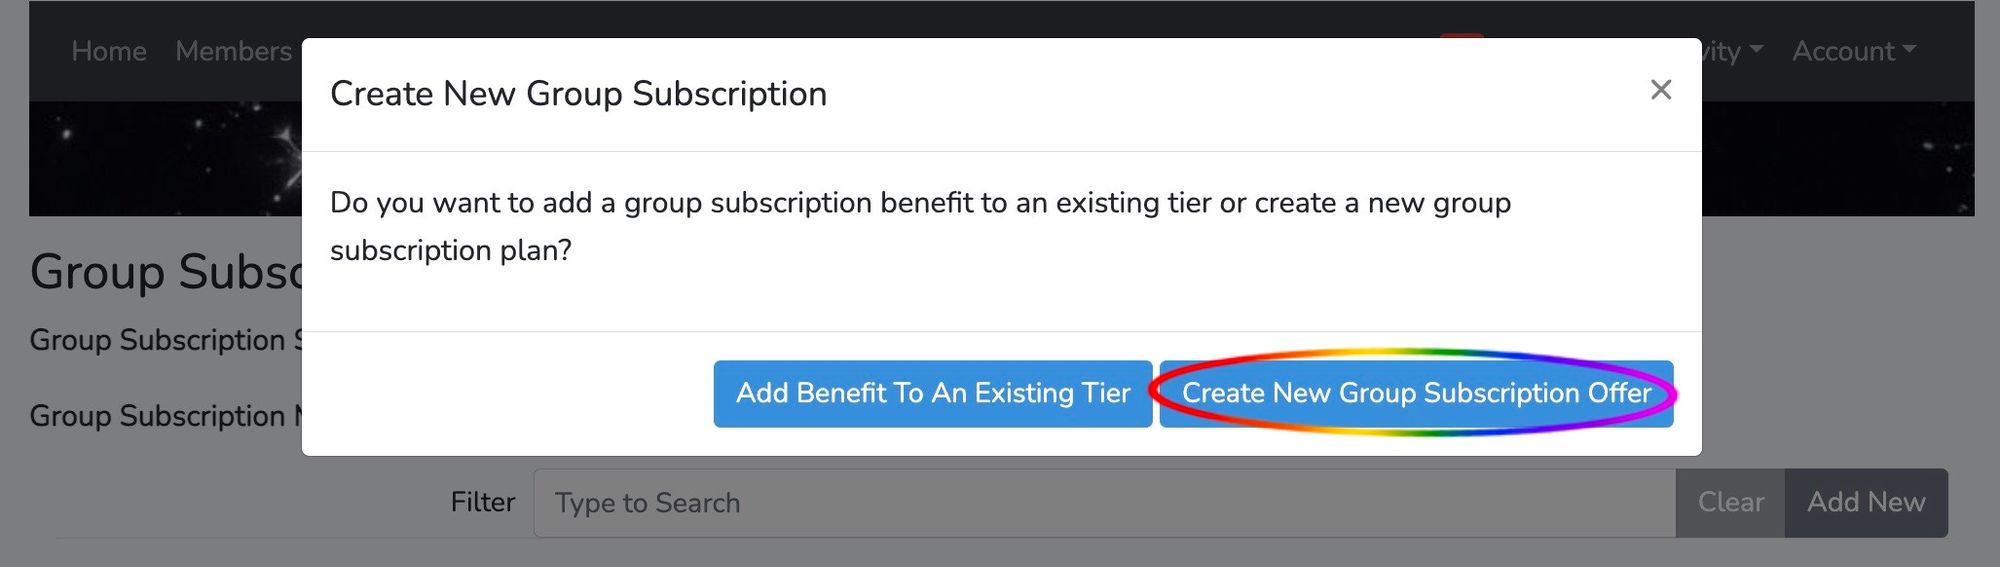 Create New Group Subscription circled